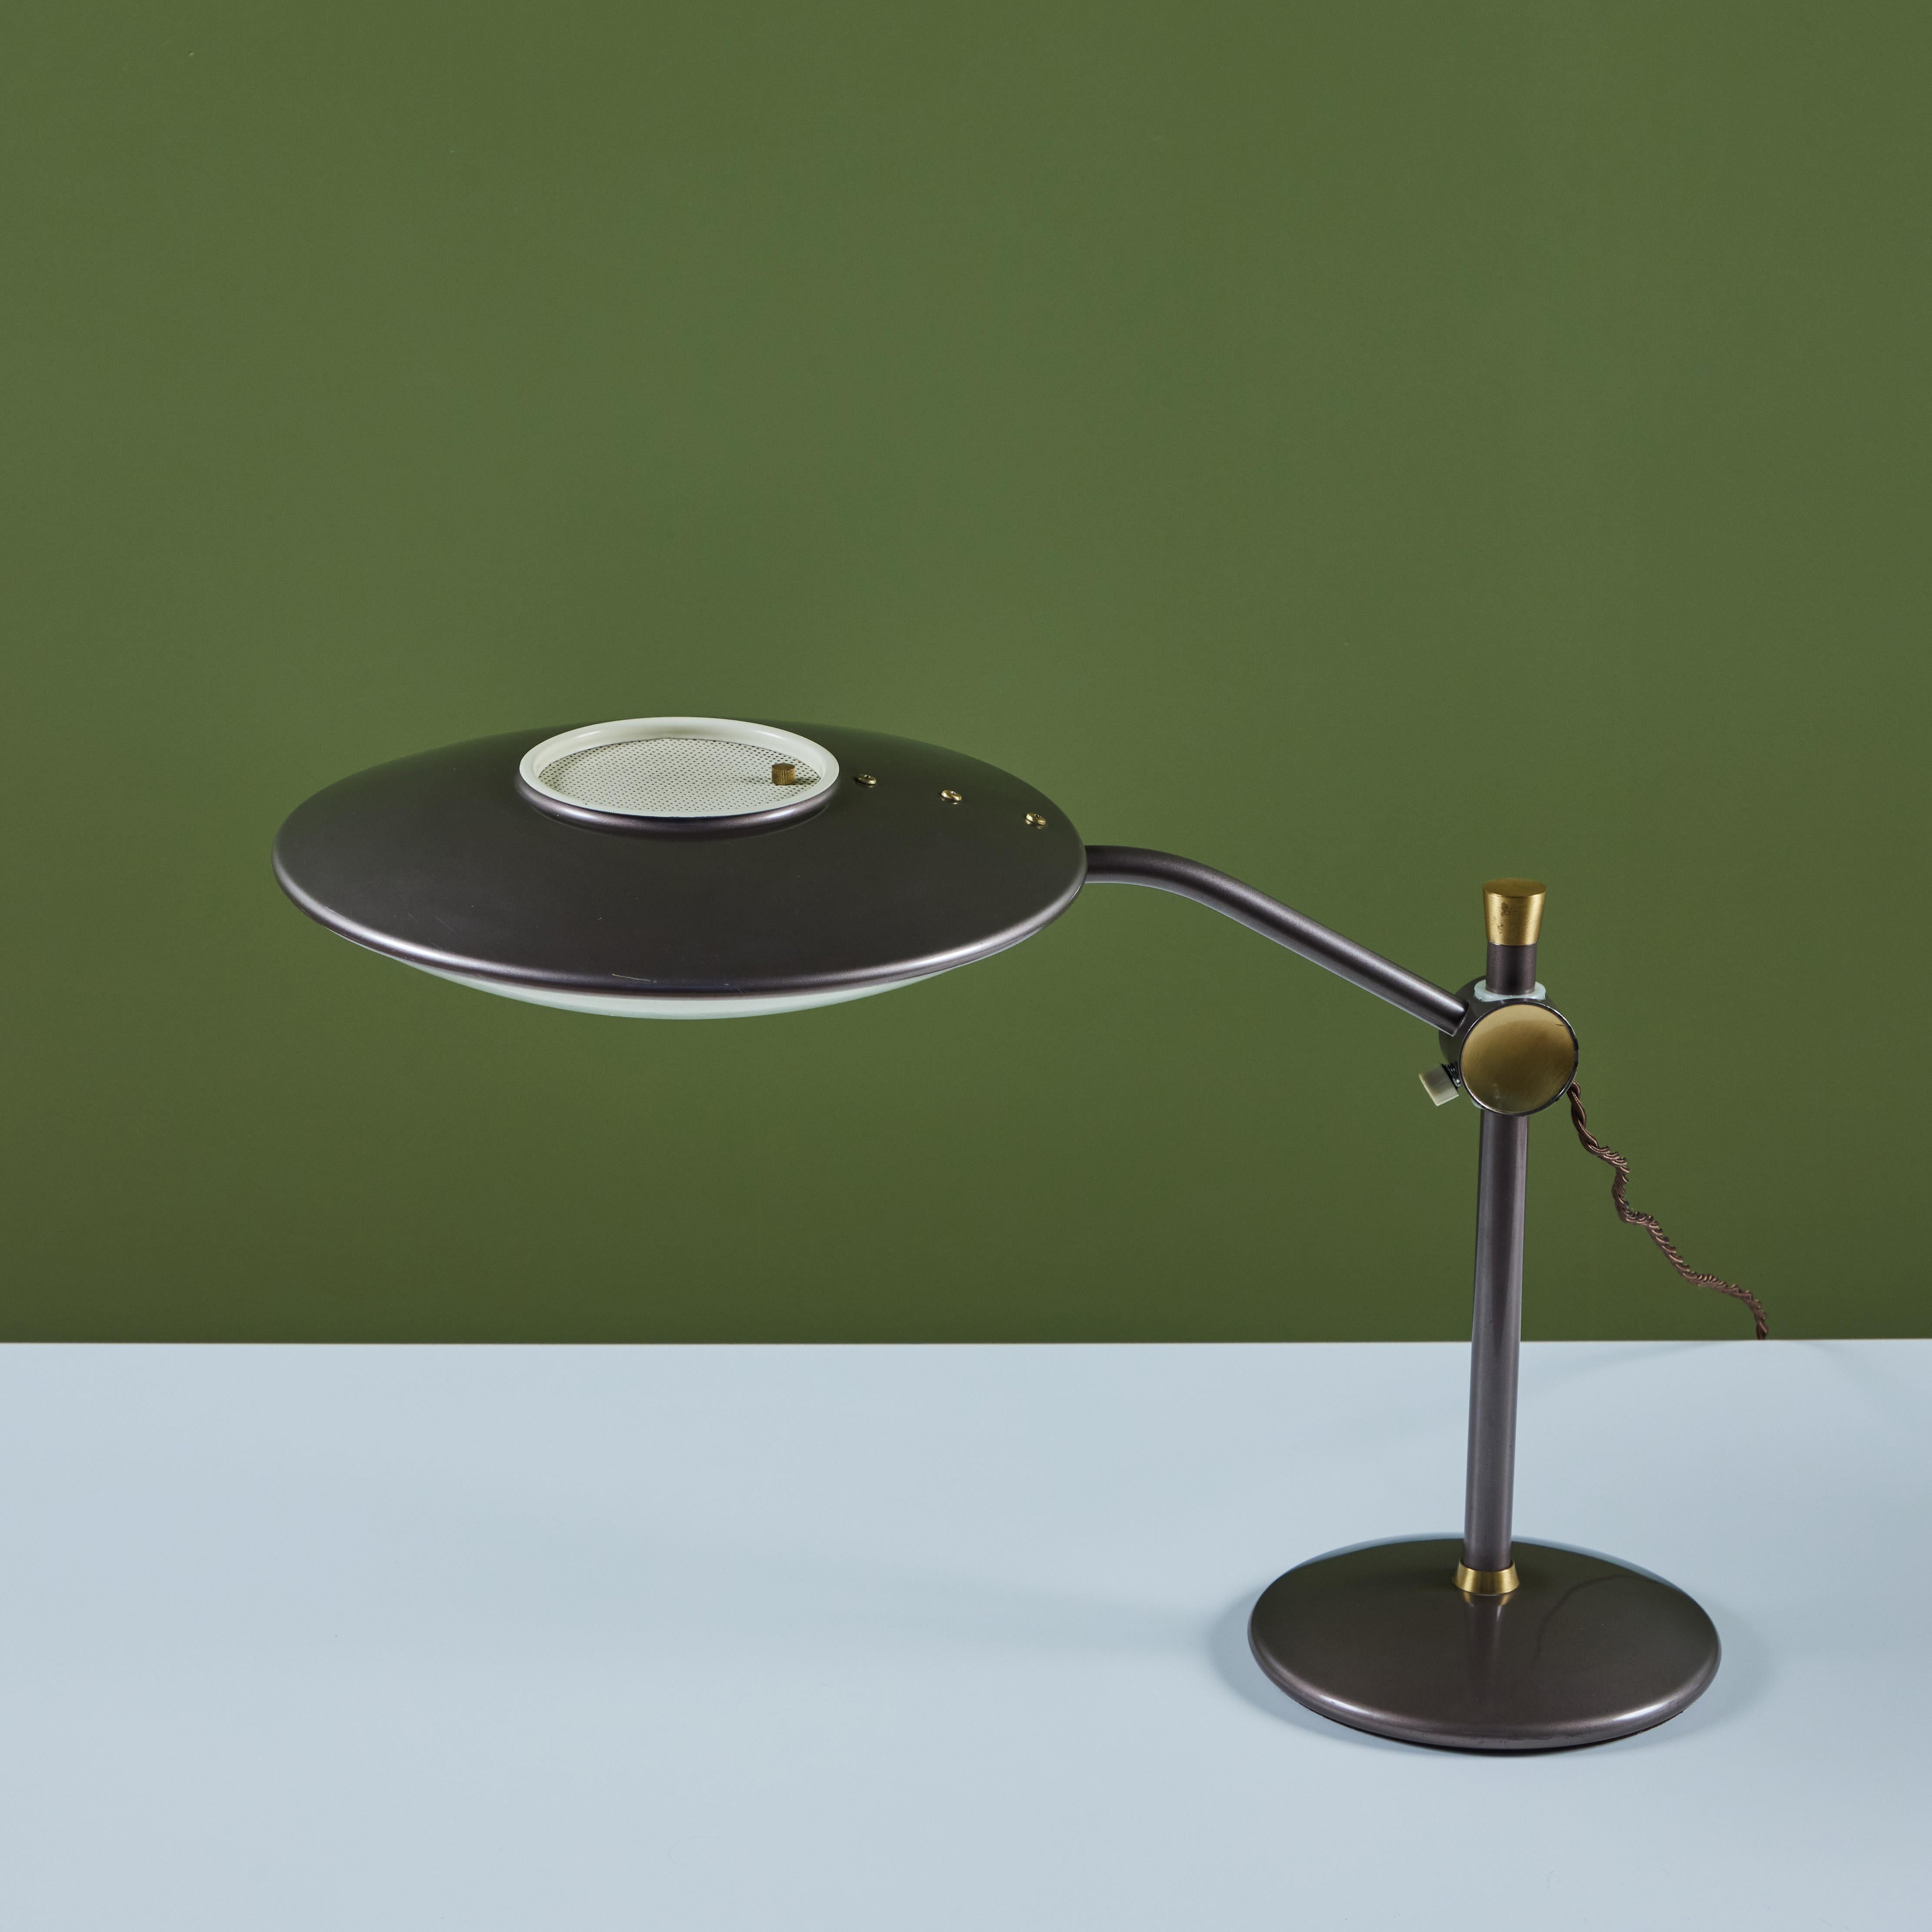 Mid-20th Century Dazor Taupe Enamel Desk Lamp with Brass Accents